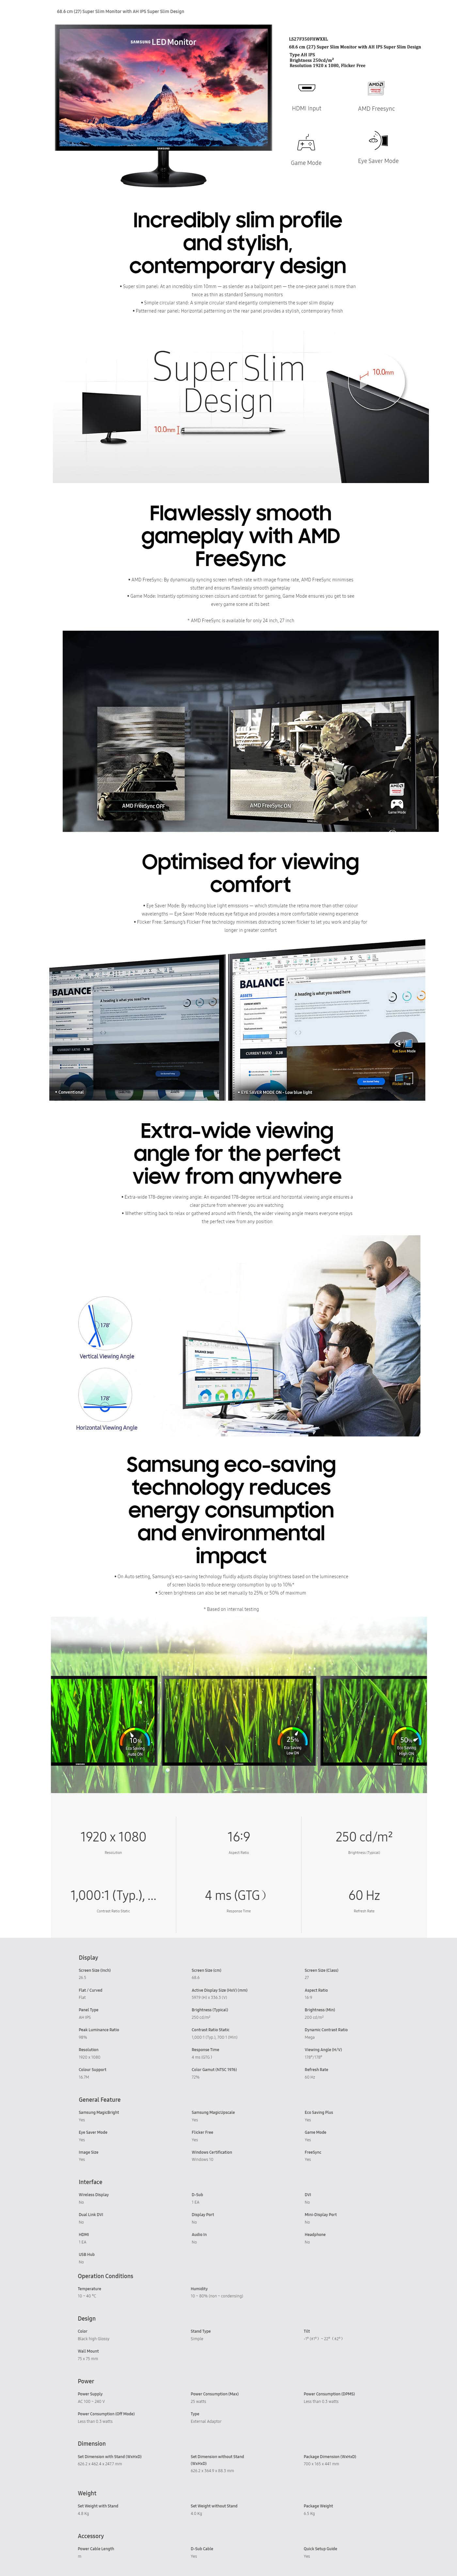  Buy Online Samsung 27inch Super Slim Monitor with AH IPS (LS27F350FHWXXL)